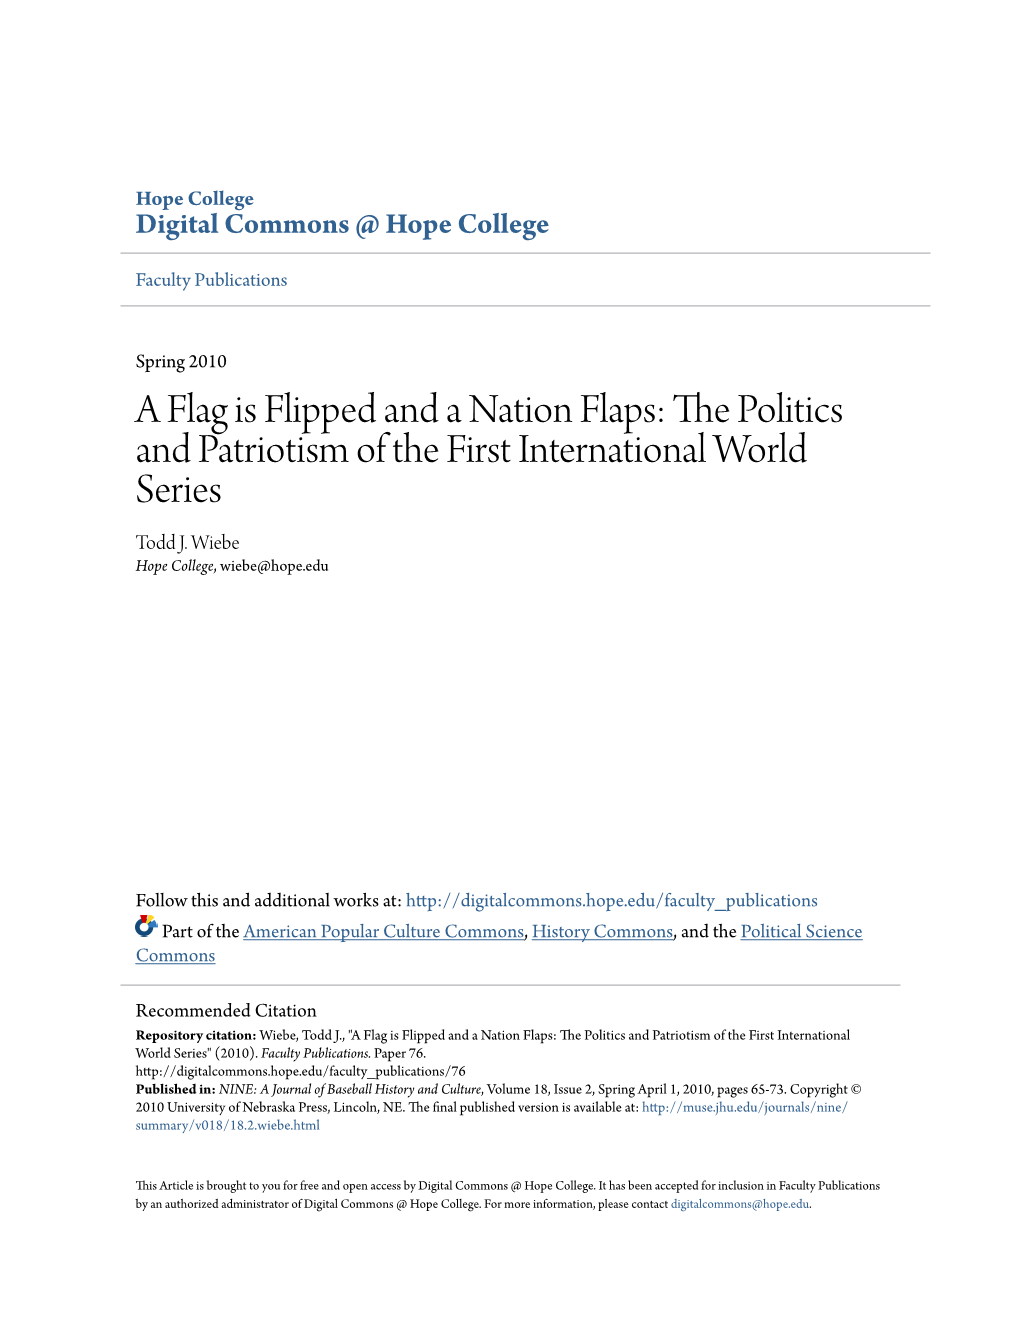 A Flag Is Flipped and a Nation Flaps: the Olitp Ics and Patriotism of the First International World Series Todd J